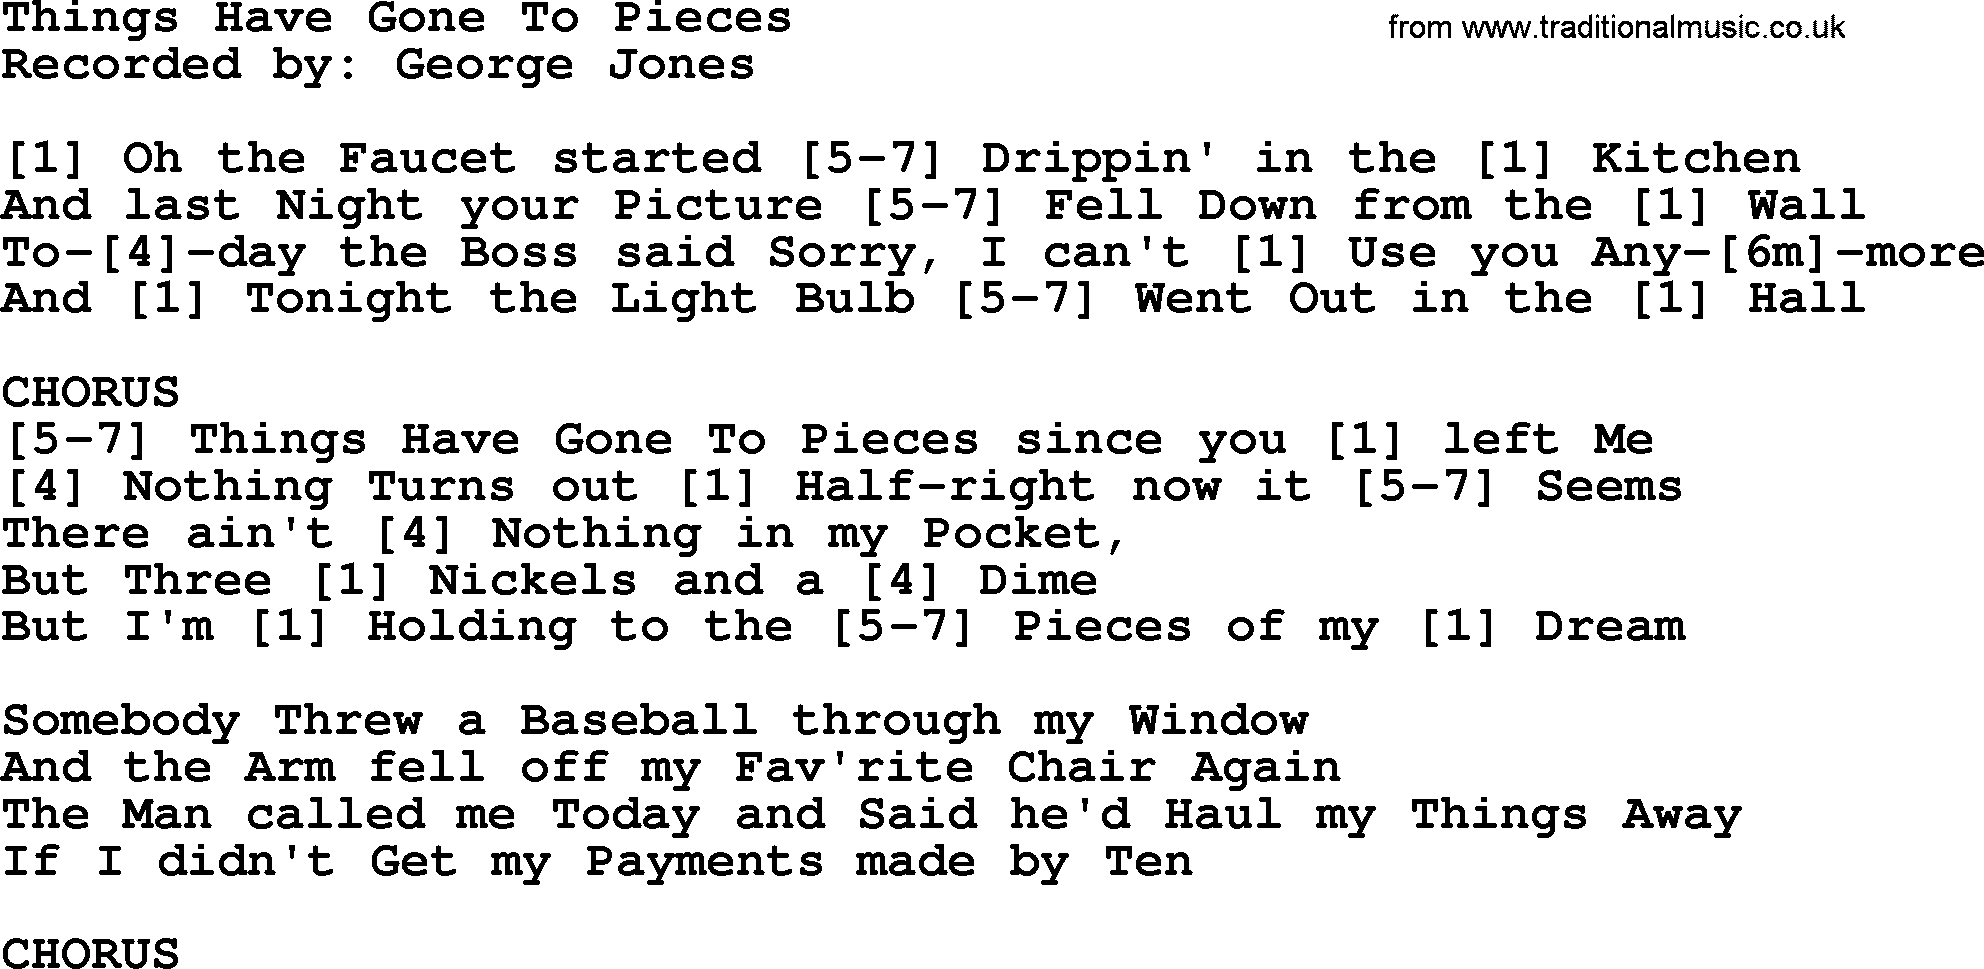 George Jones song: Things Have Gone To Pieces, lyrics and chords